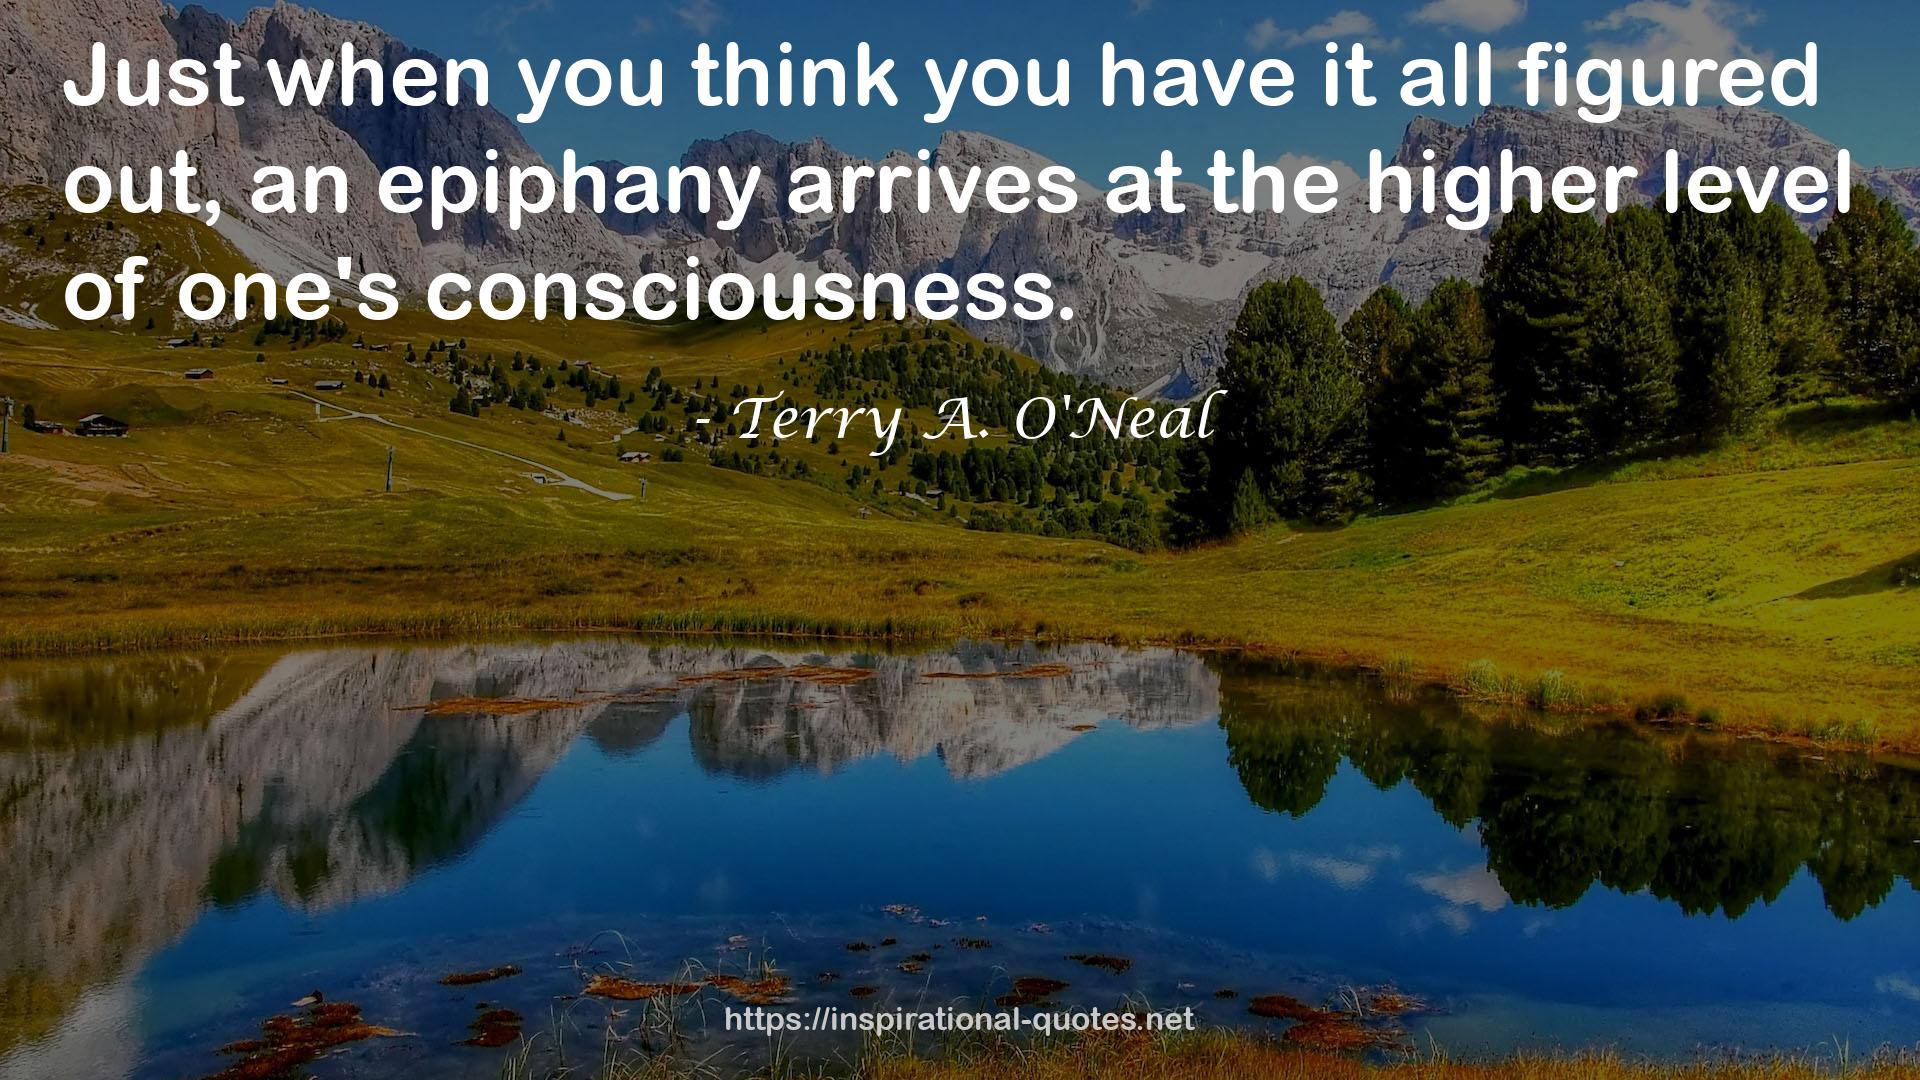 Terry A. O'Neal QUOTES